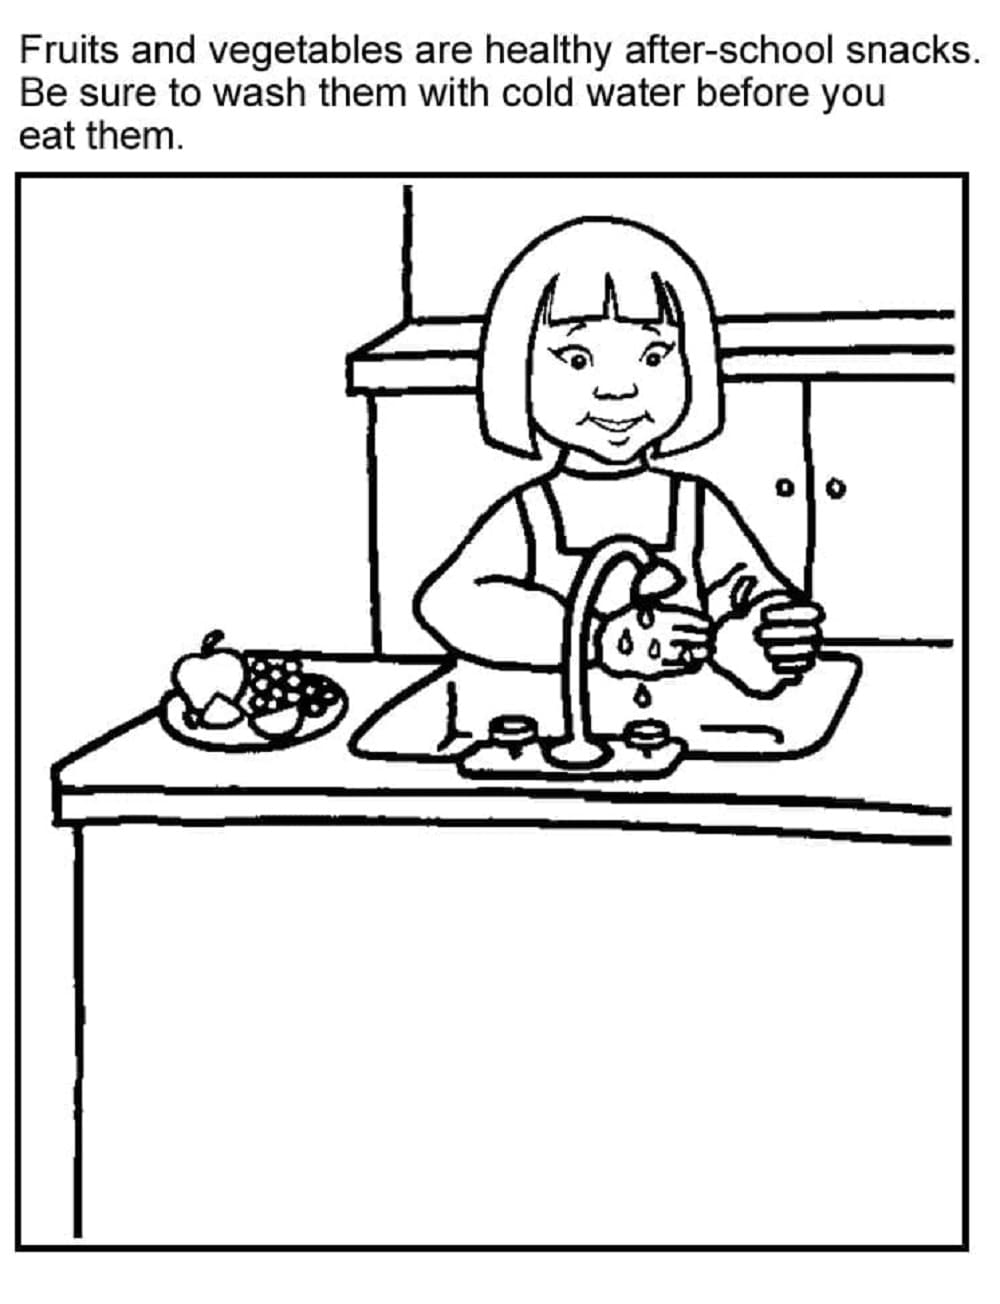 Printable Hygiene Wash Fruits And Vegetables Coloring Page